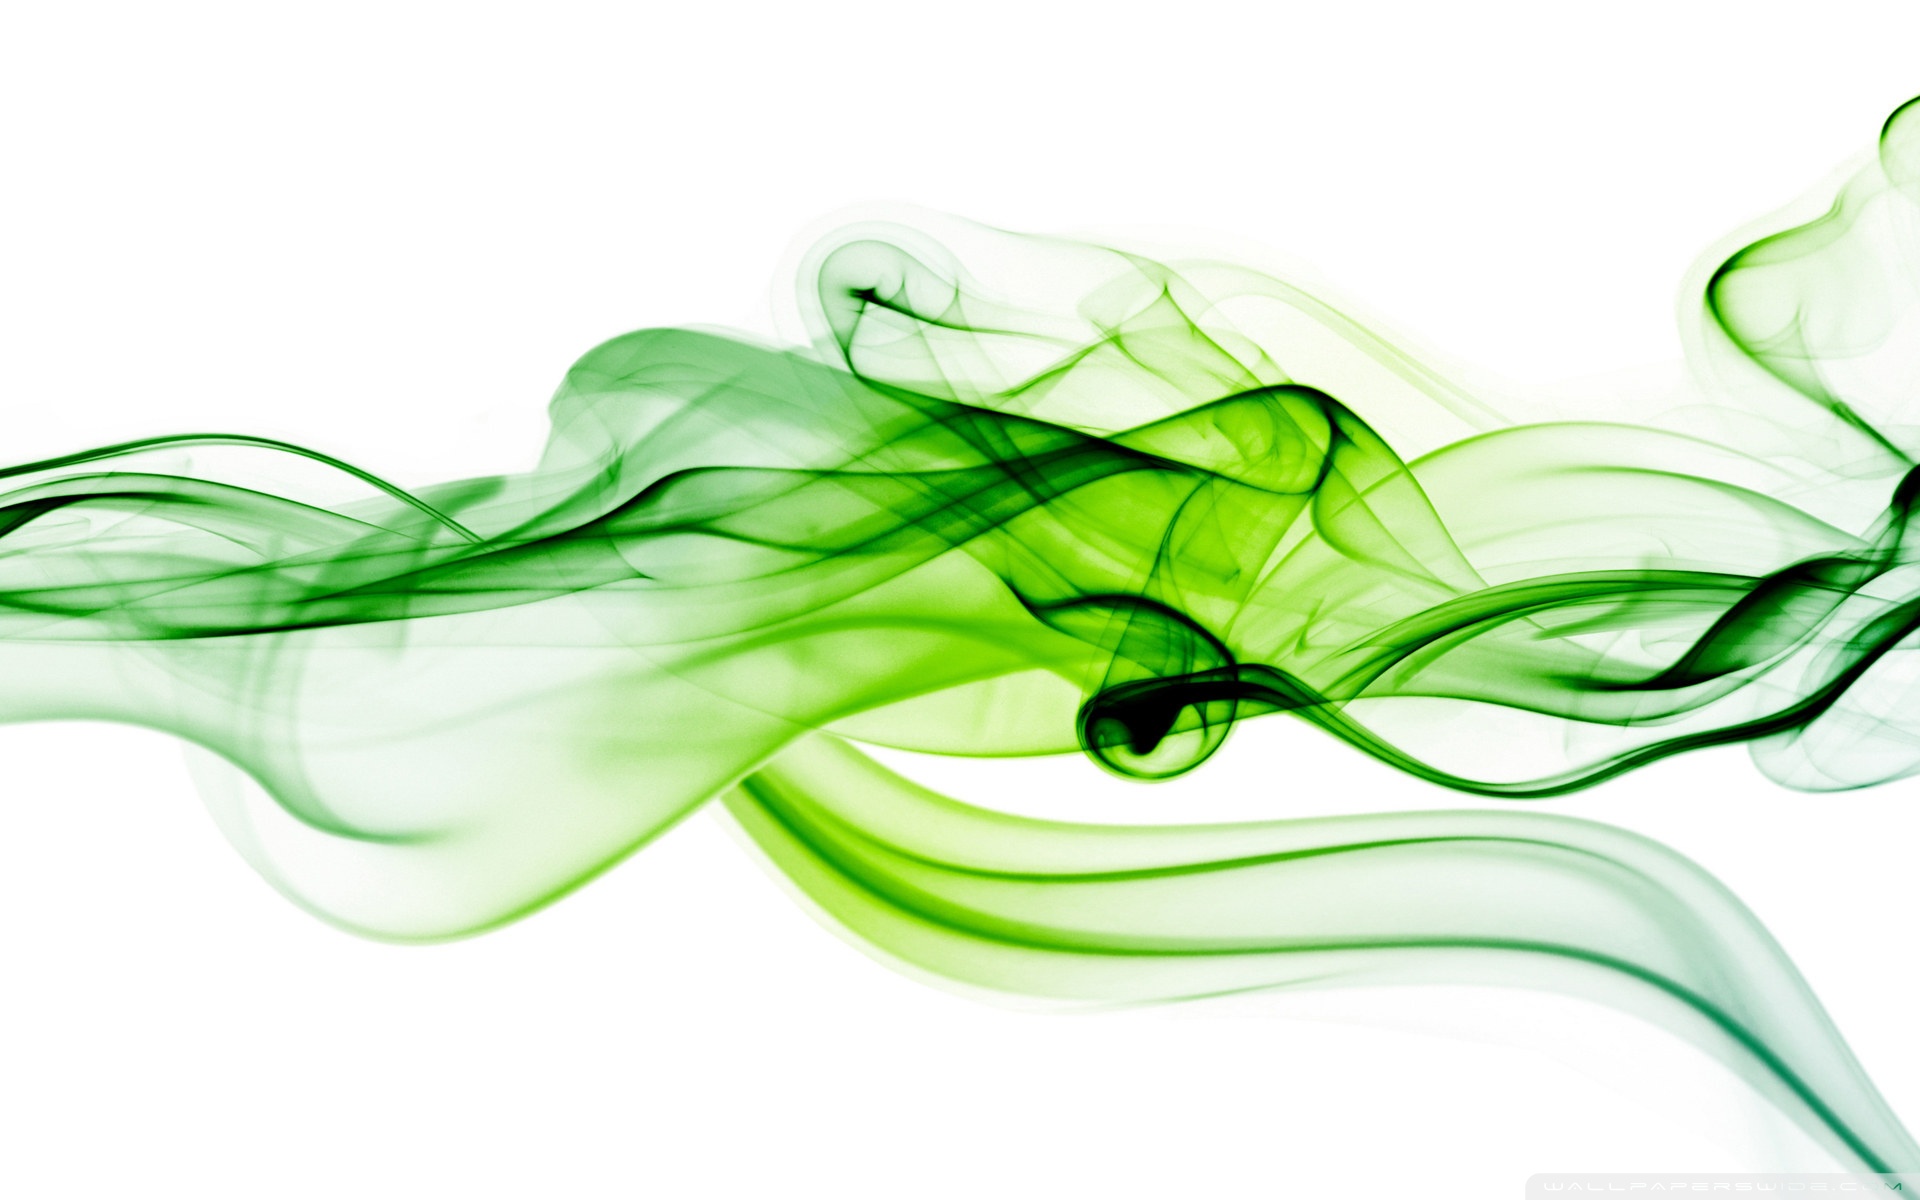 Green and White   Wallpaper High Definition High Quality Widescreen 1920x1200